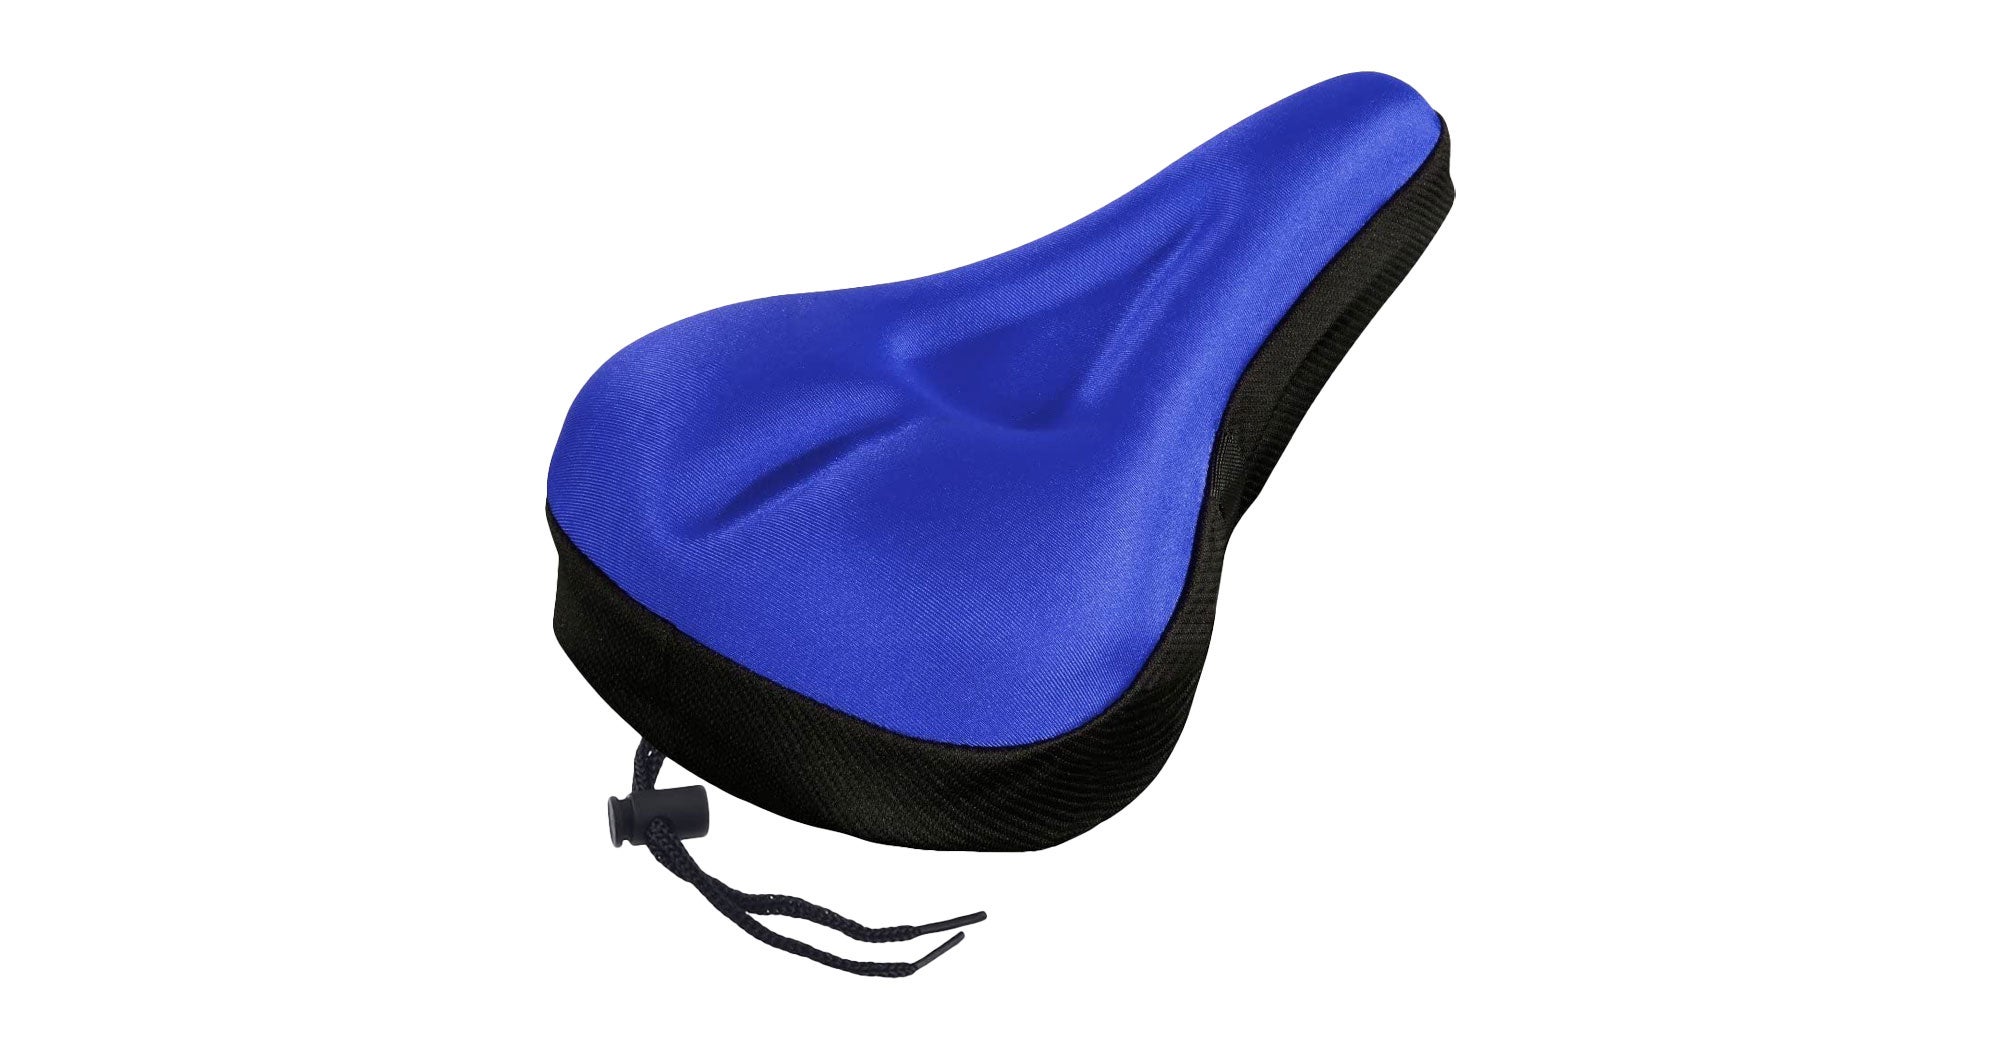 Mumustar Cycling Bicycle Bike Saddle Seat Cushion Cover Soft Gel Comfort For Spin Class Or Outdoor Biking 